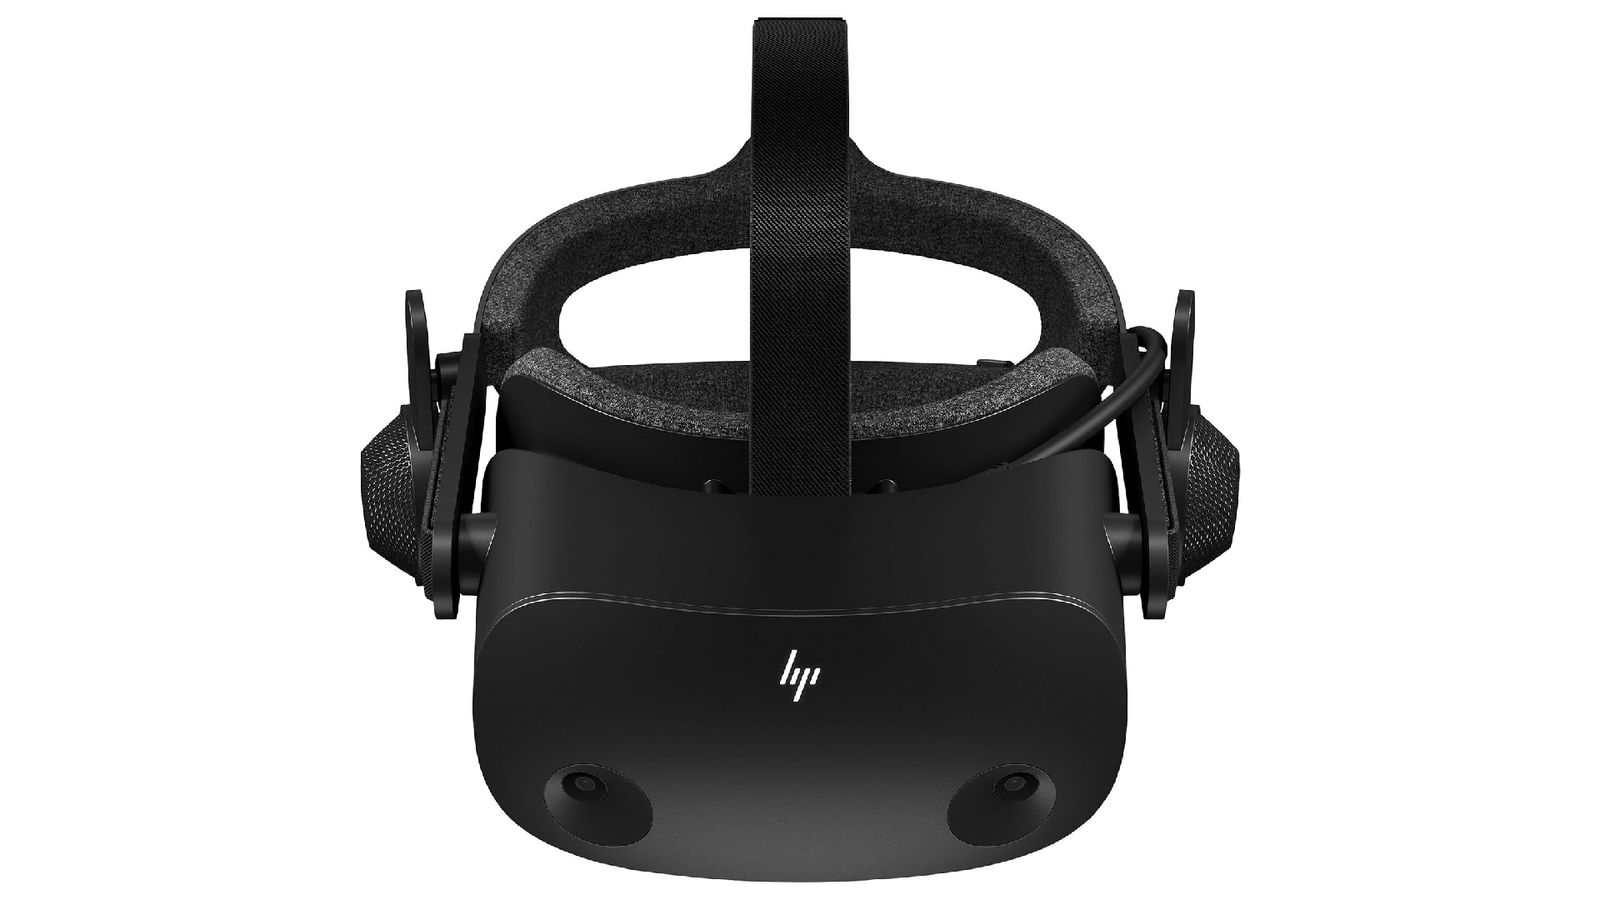 HP Reverb G2 product image of an all-black VR headset.